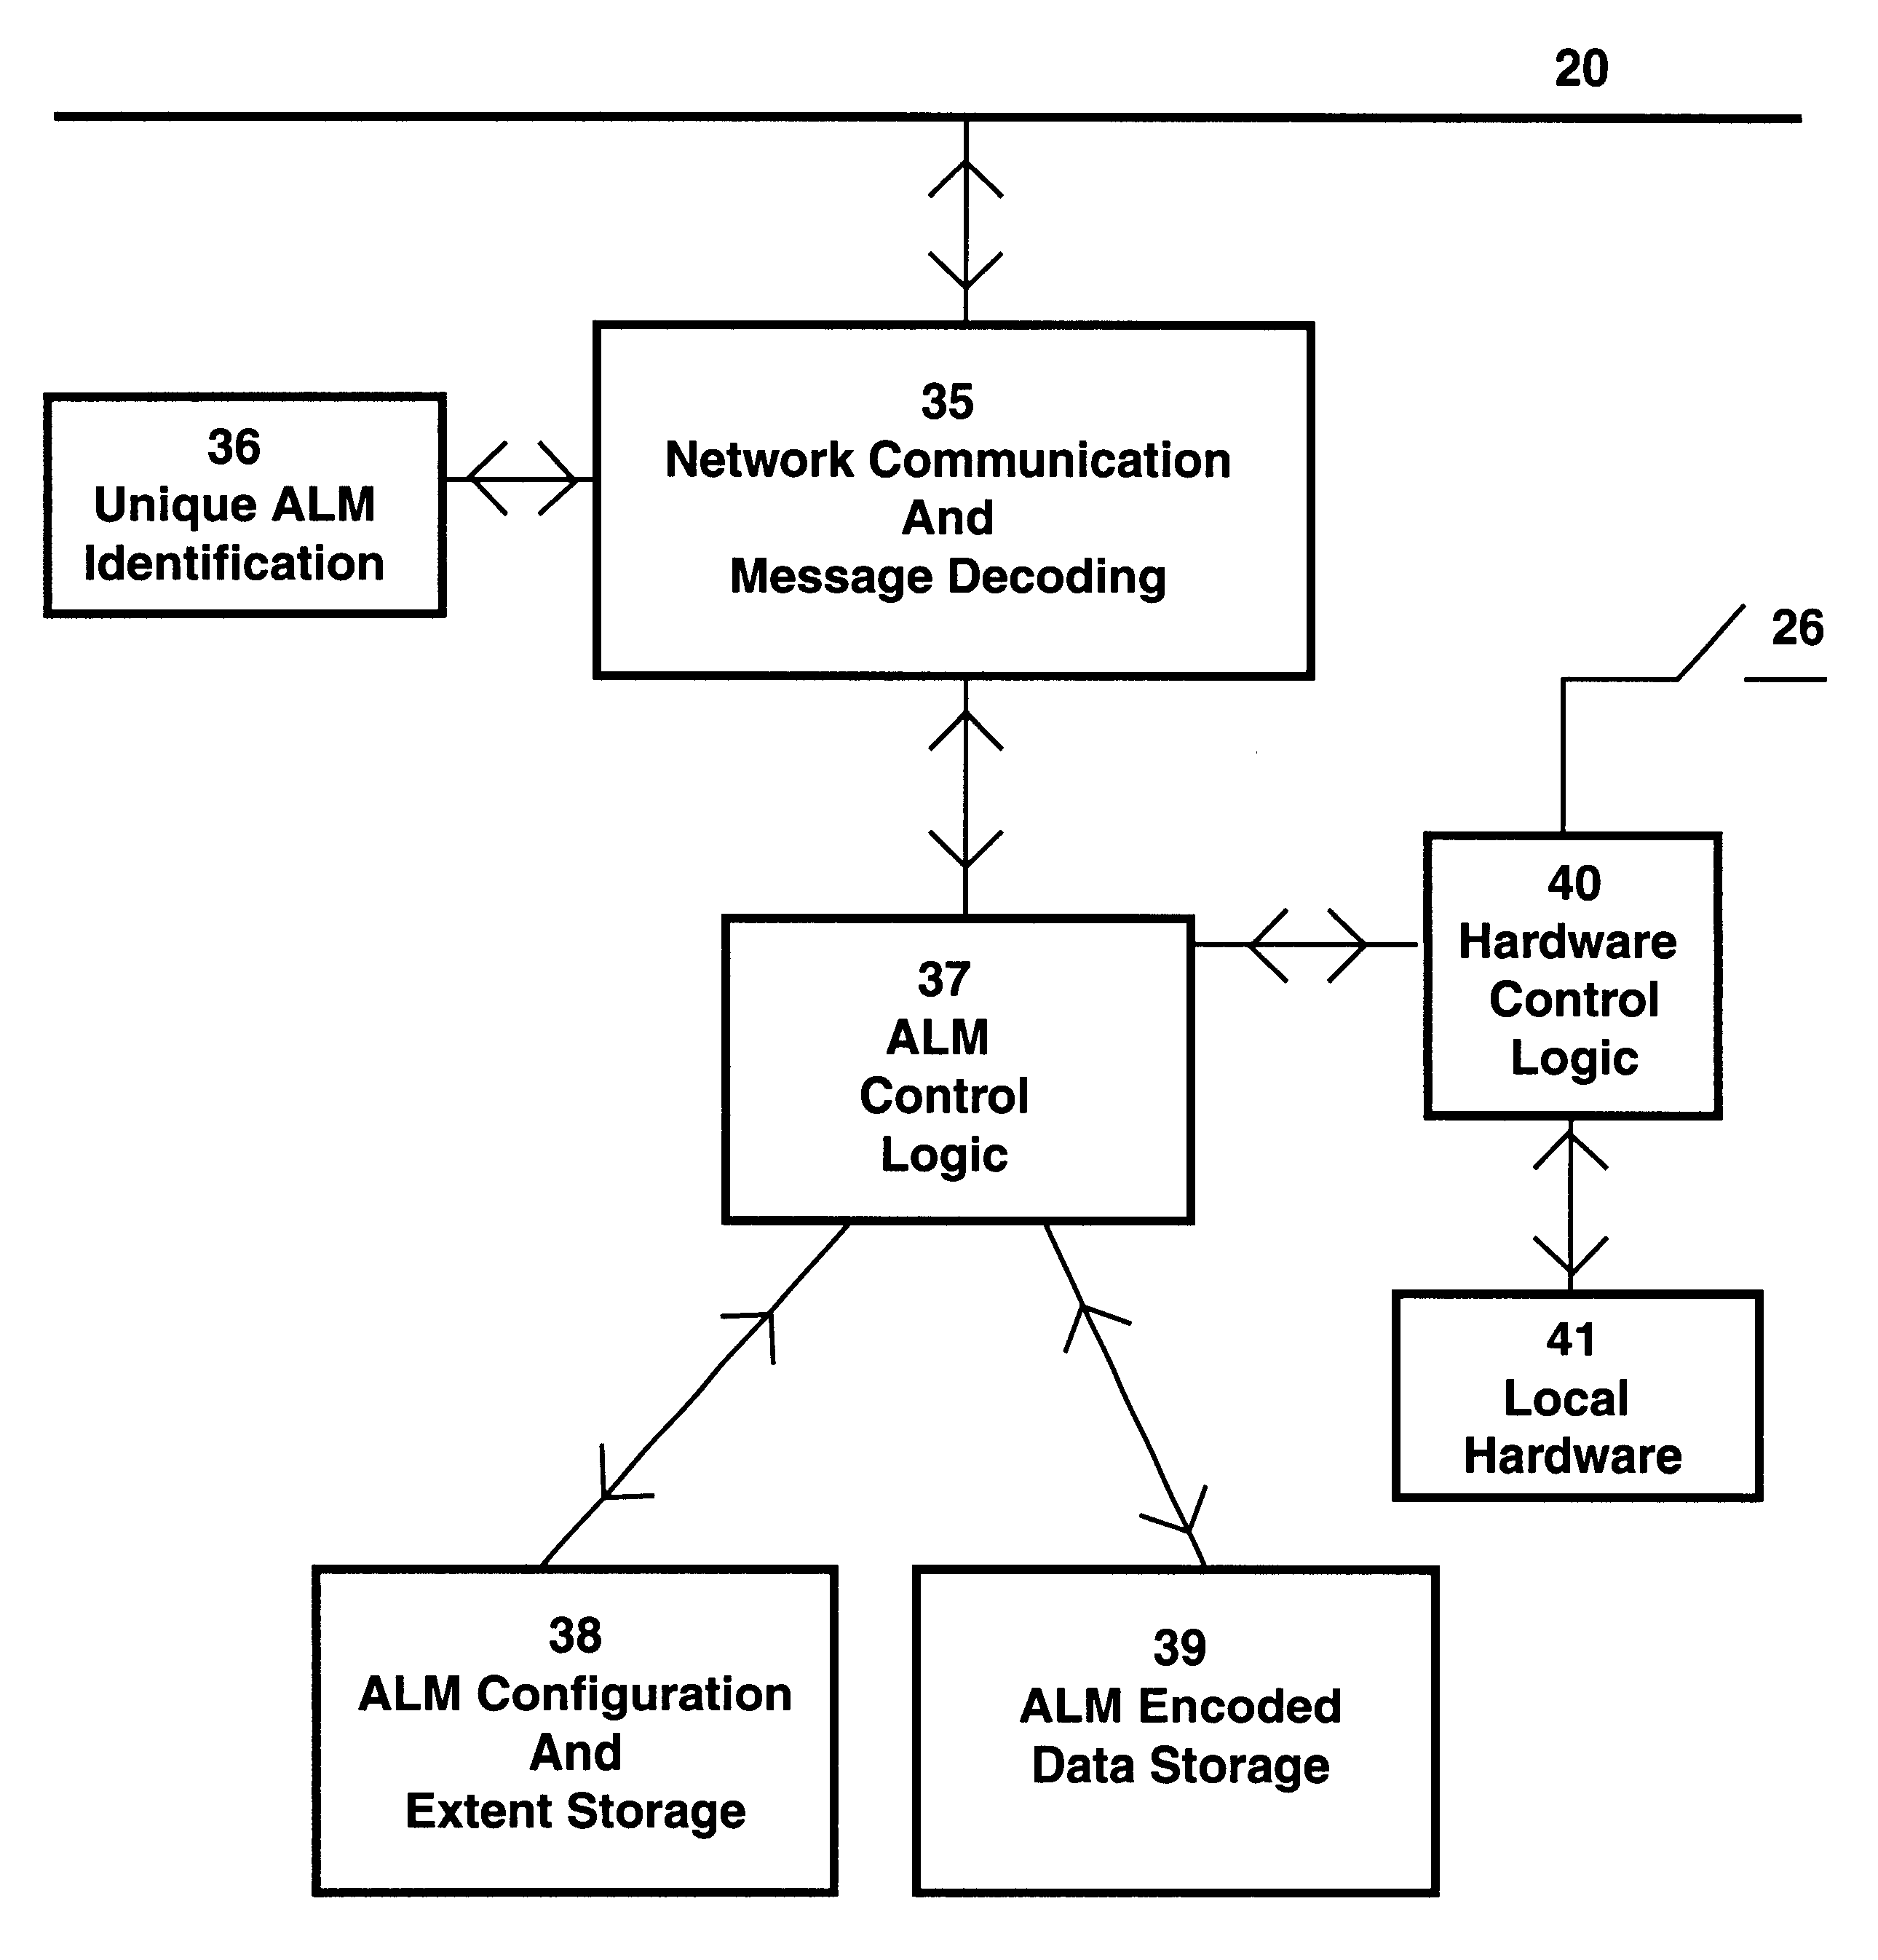 Attached logic module technique for control and maintenance in a distributed and networked control system